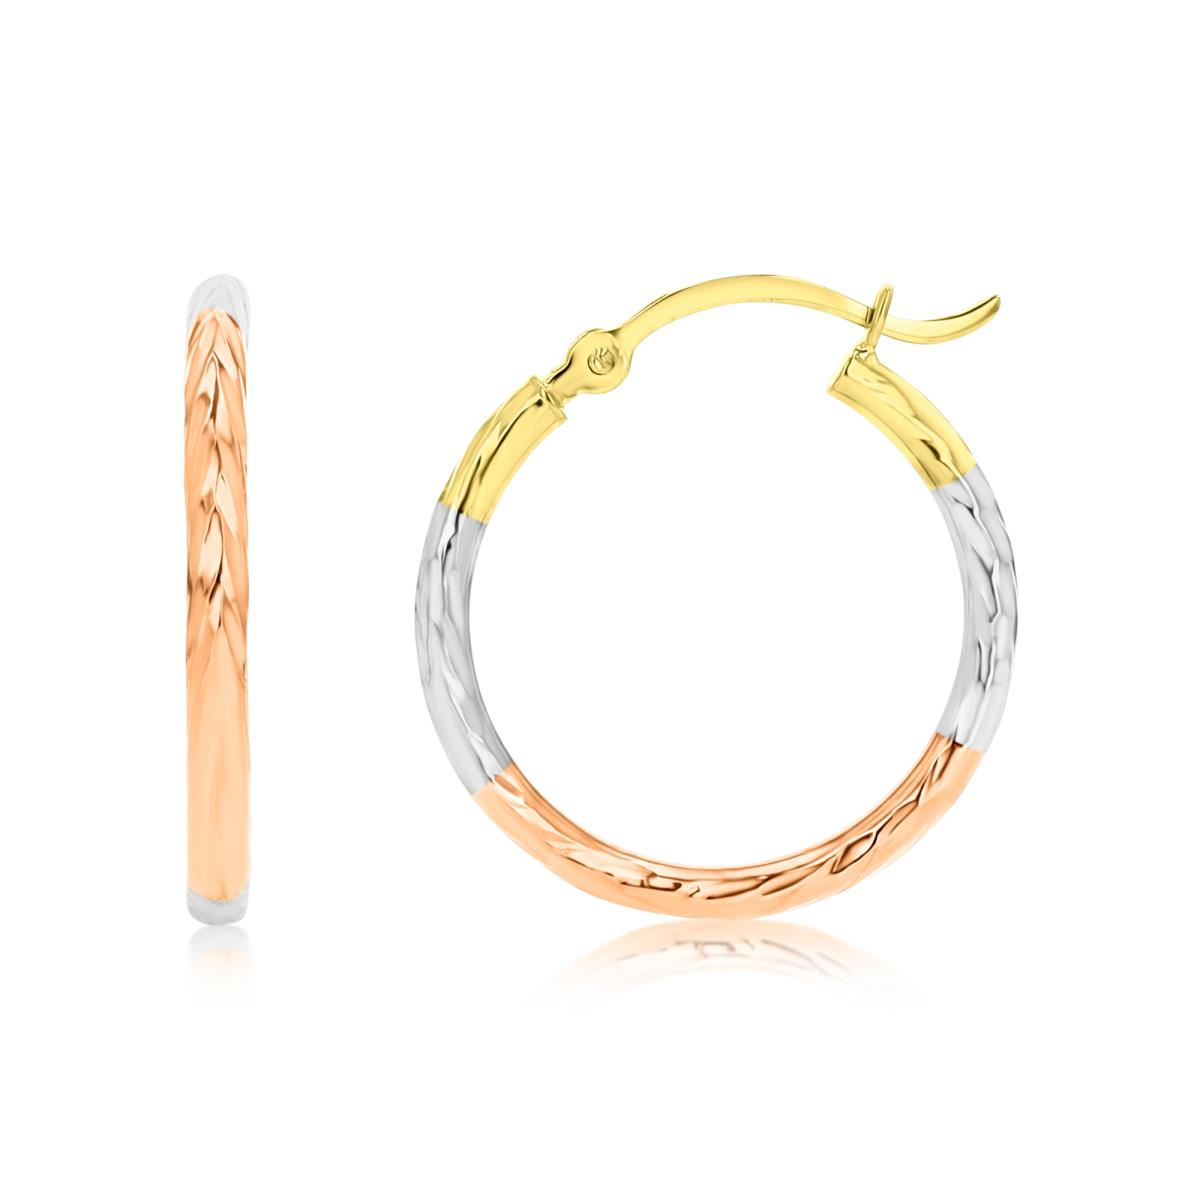 14K Gold Tricolor 2x20mm (0.75") Twisted DC Hoop Earring